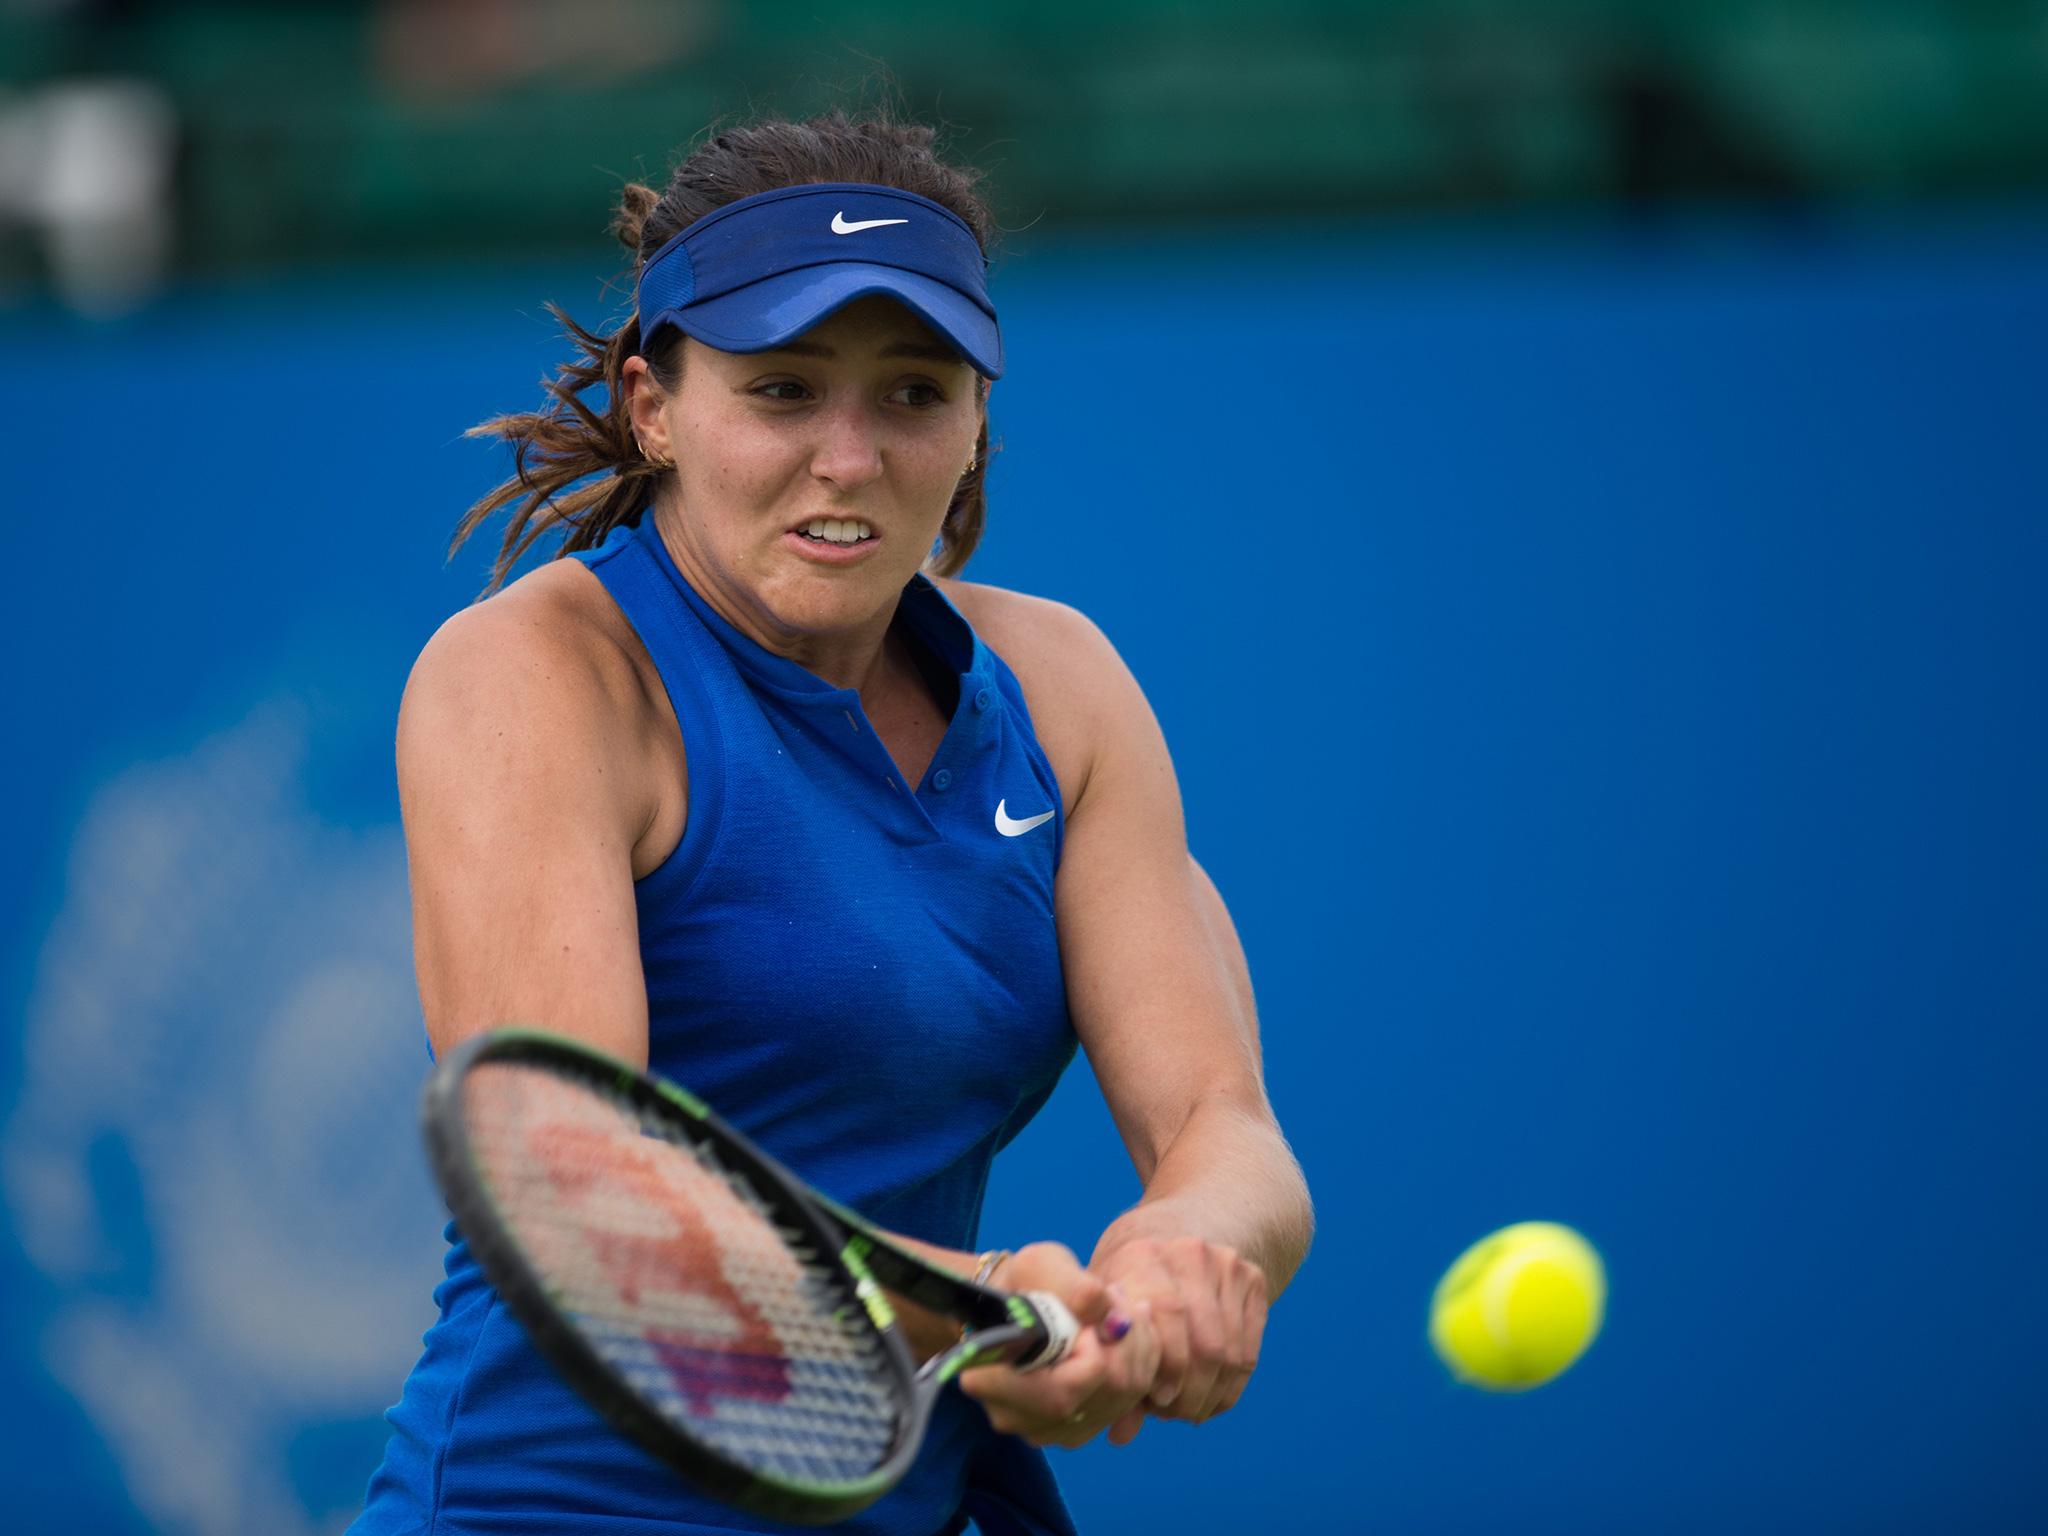 Robson was forced to retire from her qualifying match on Sunday